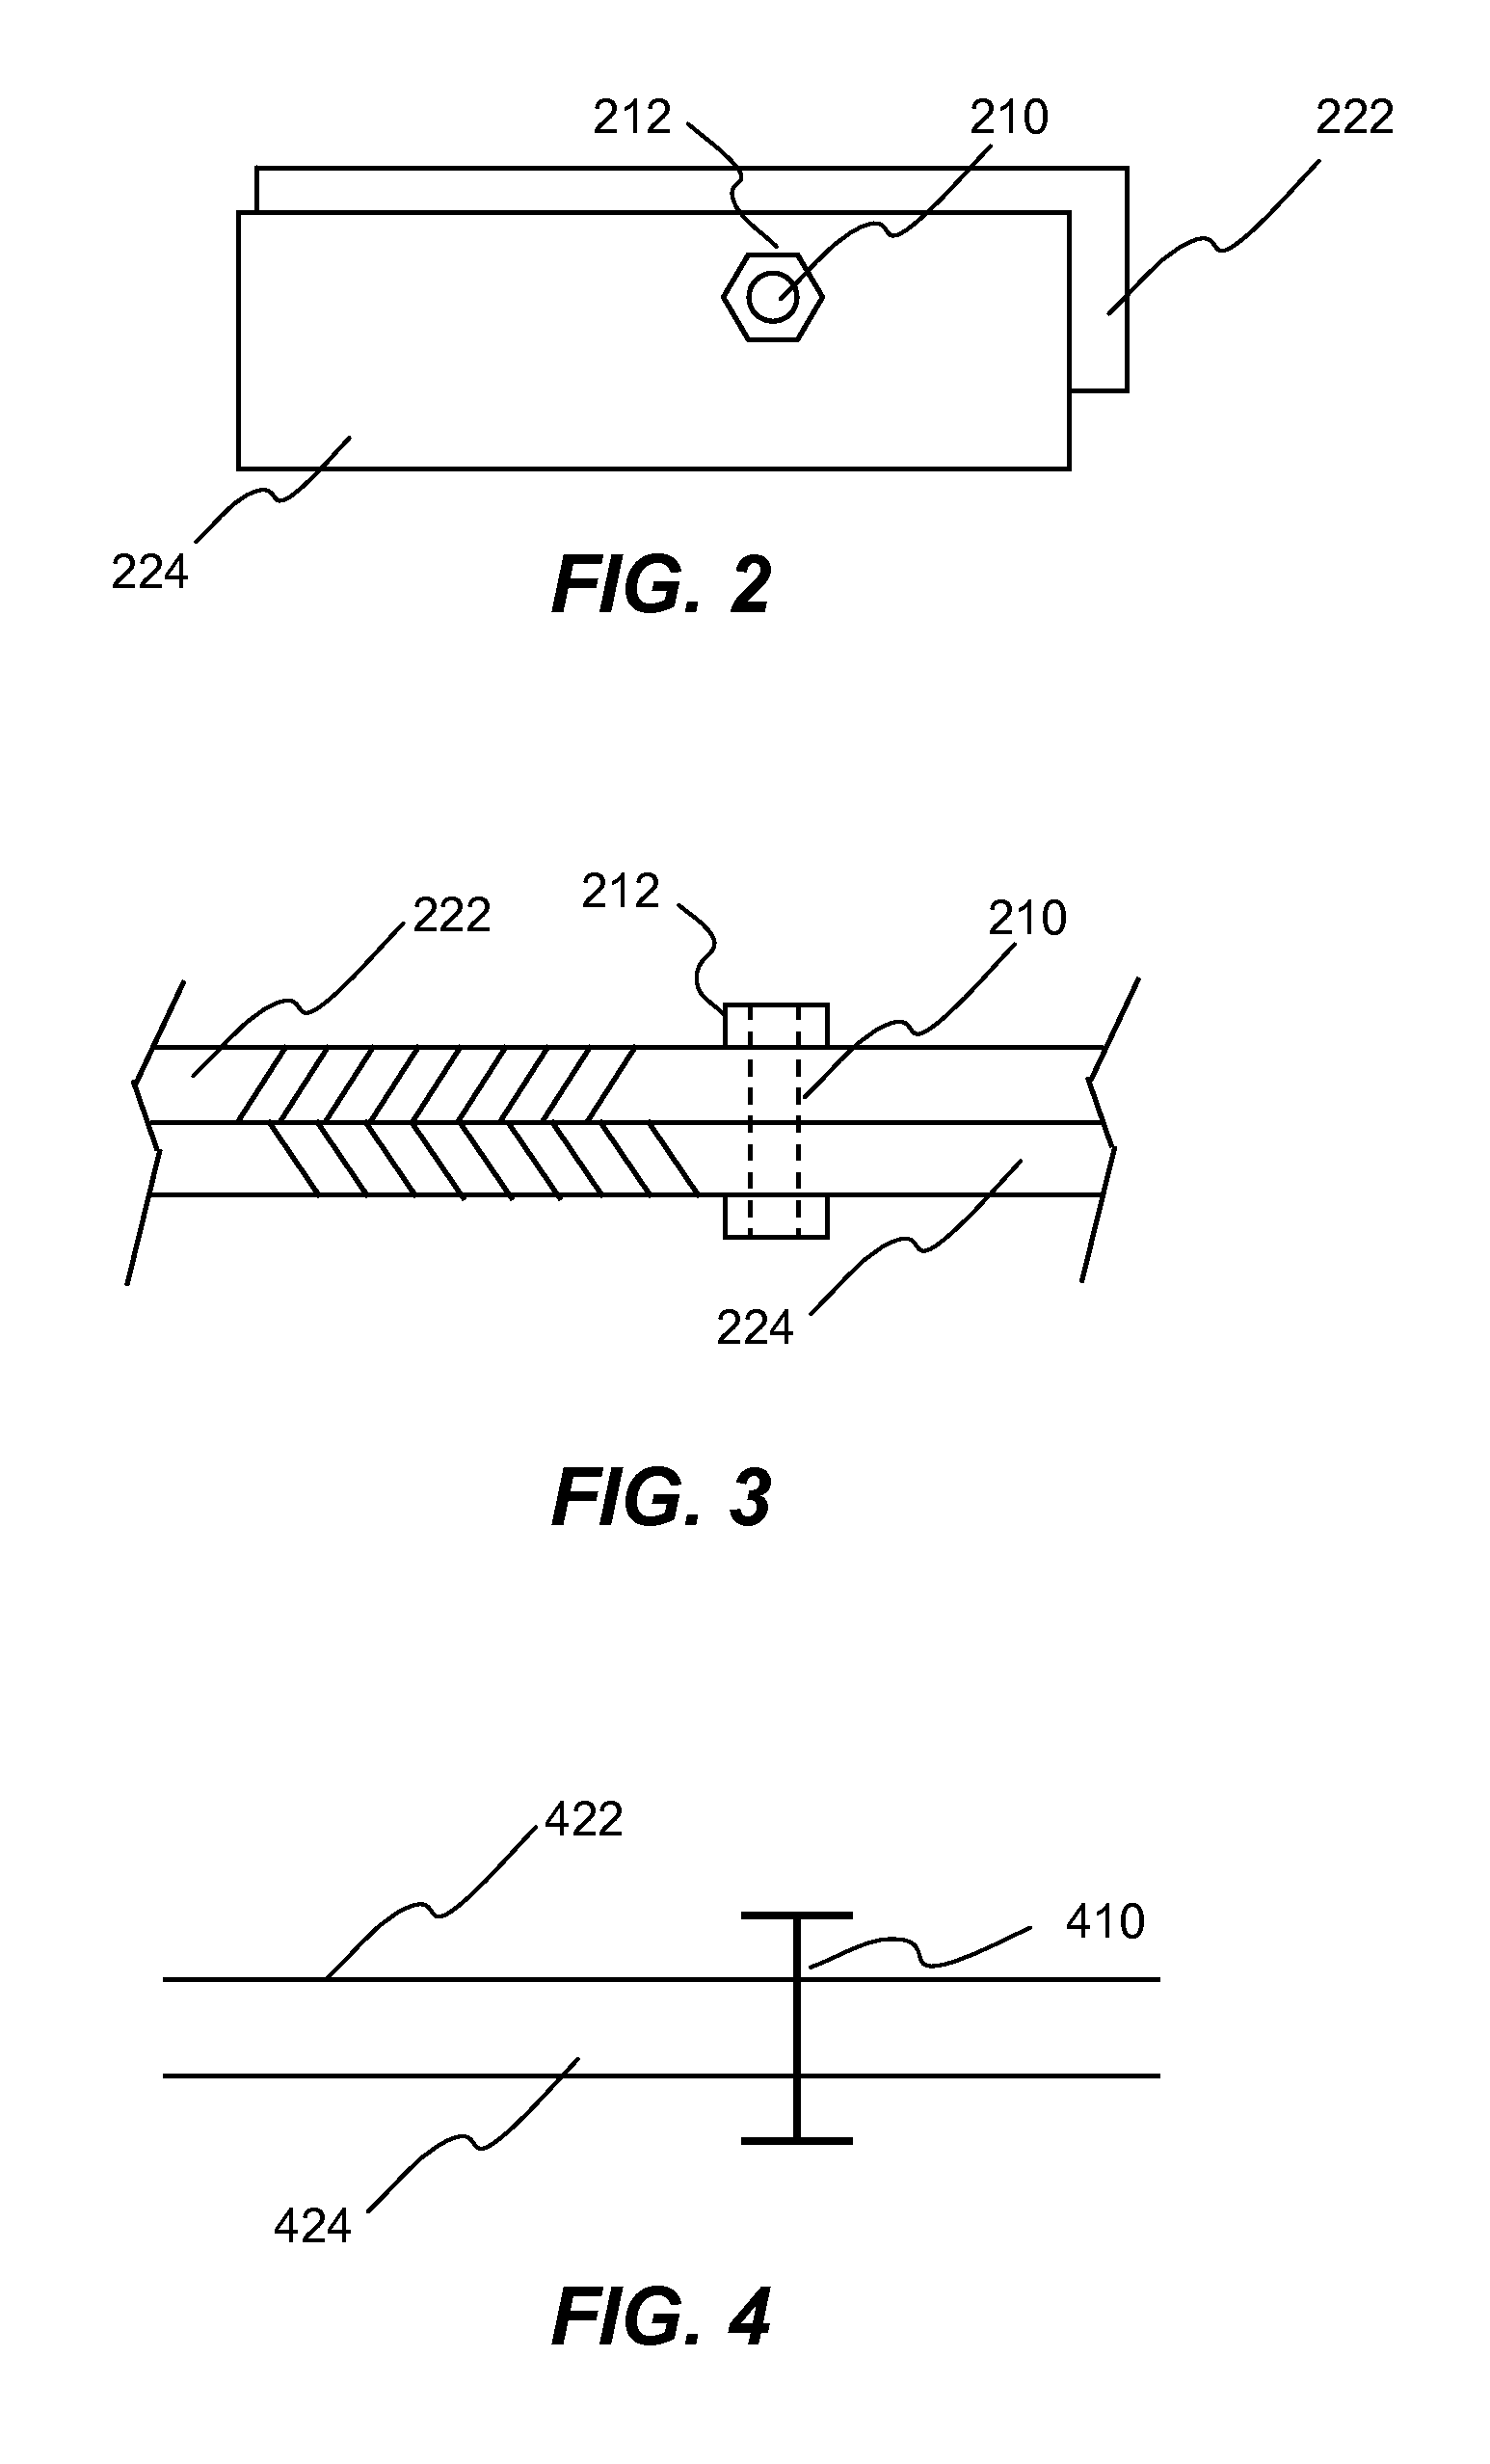 Method of initializing bolt pretension in a finite element analysis